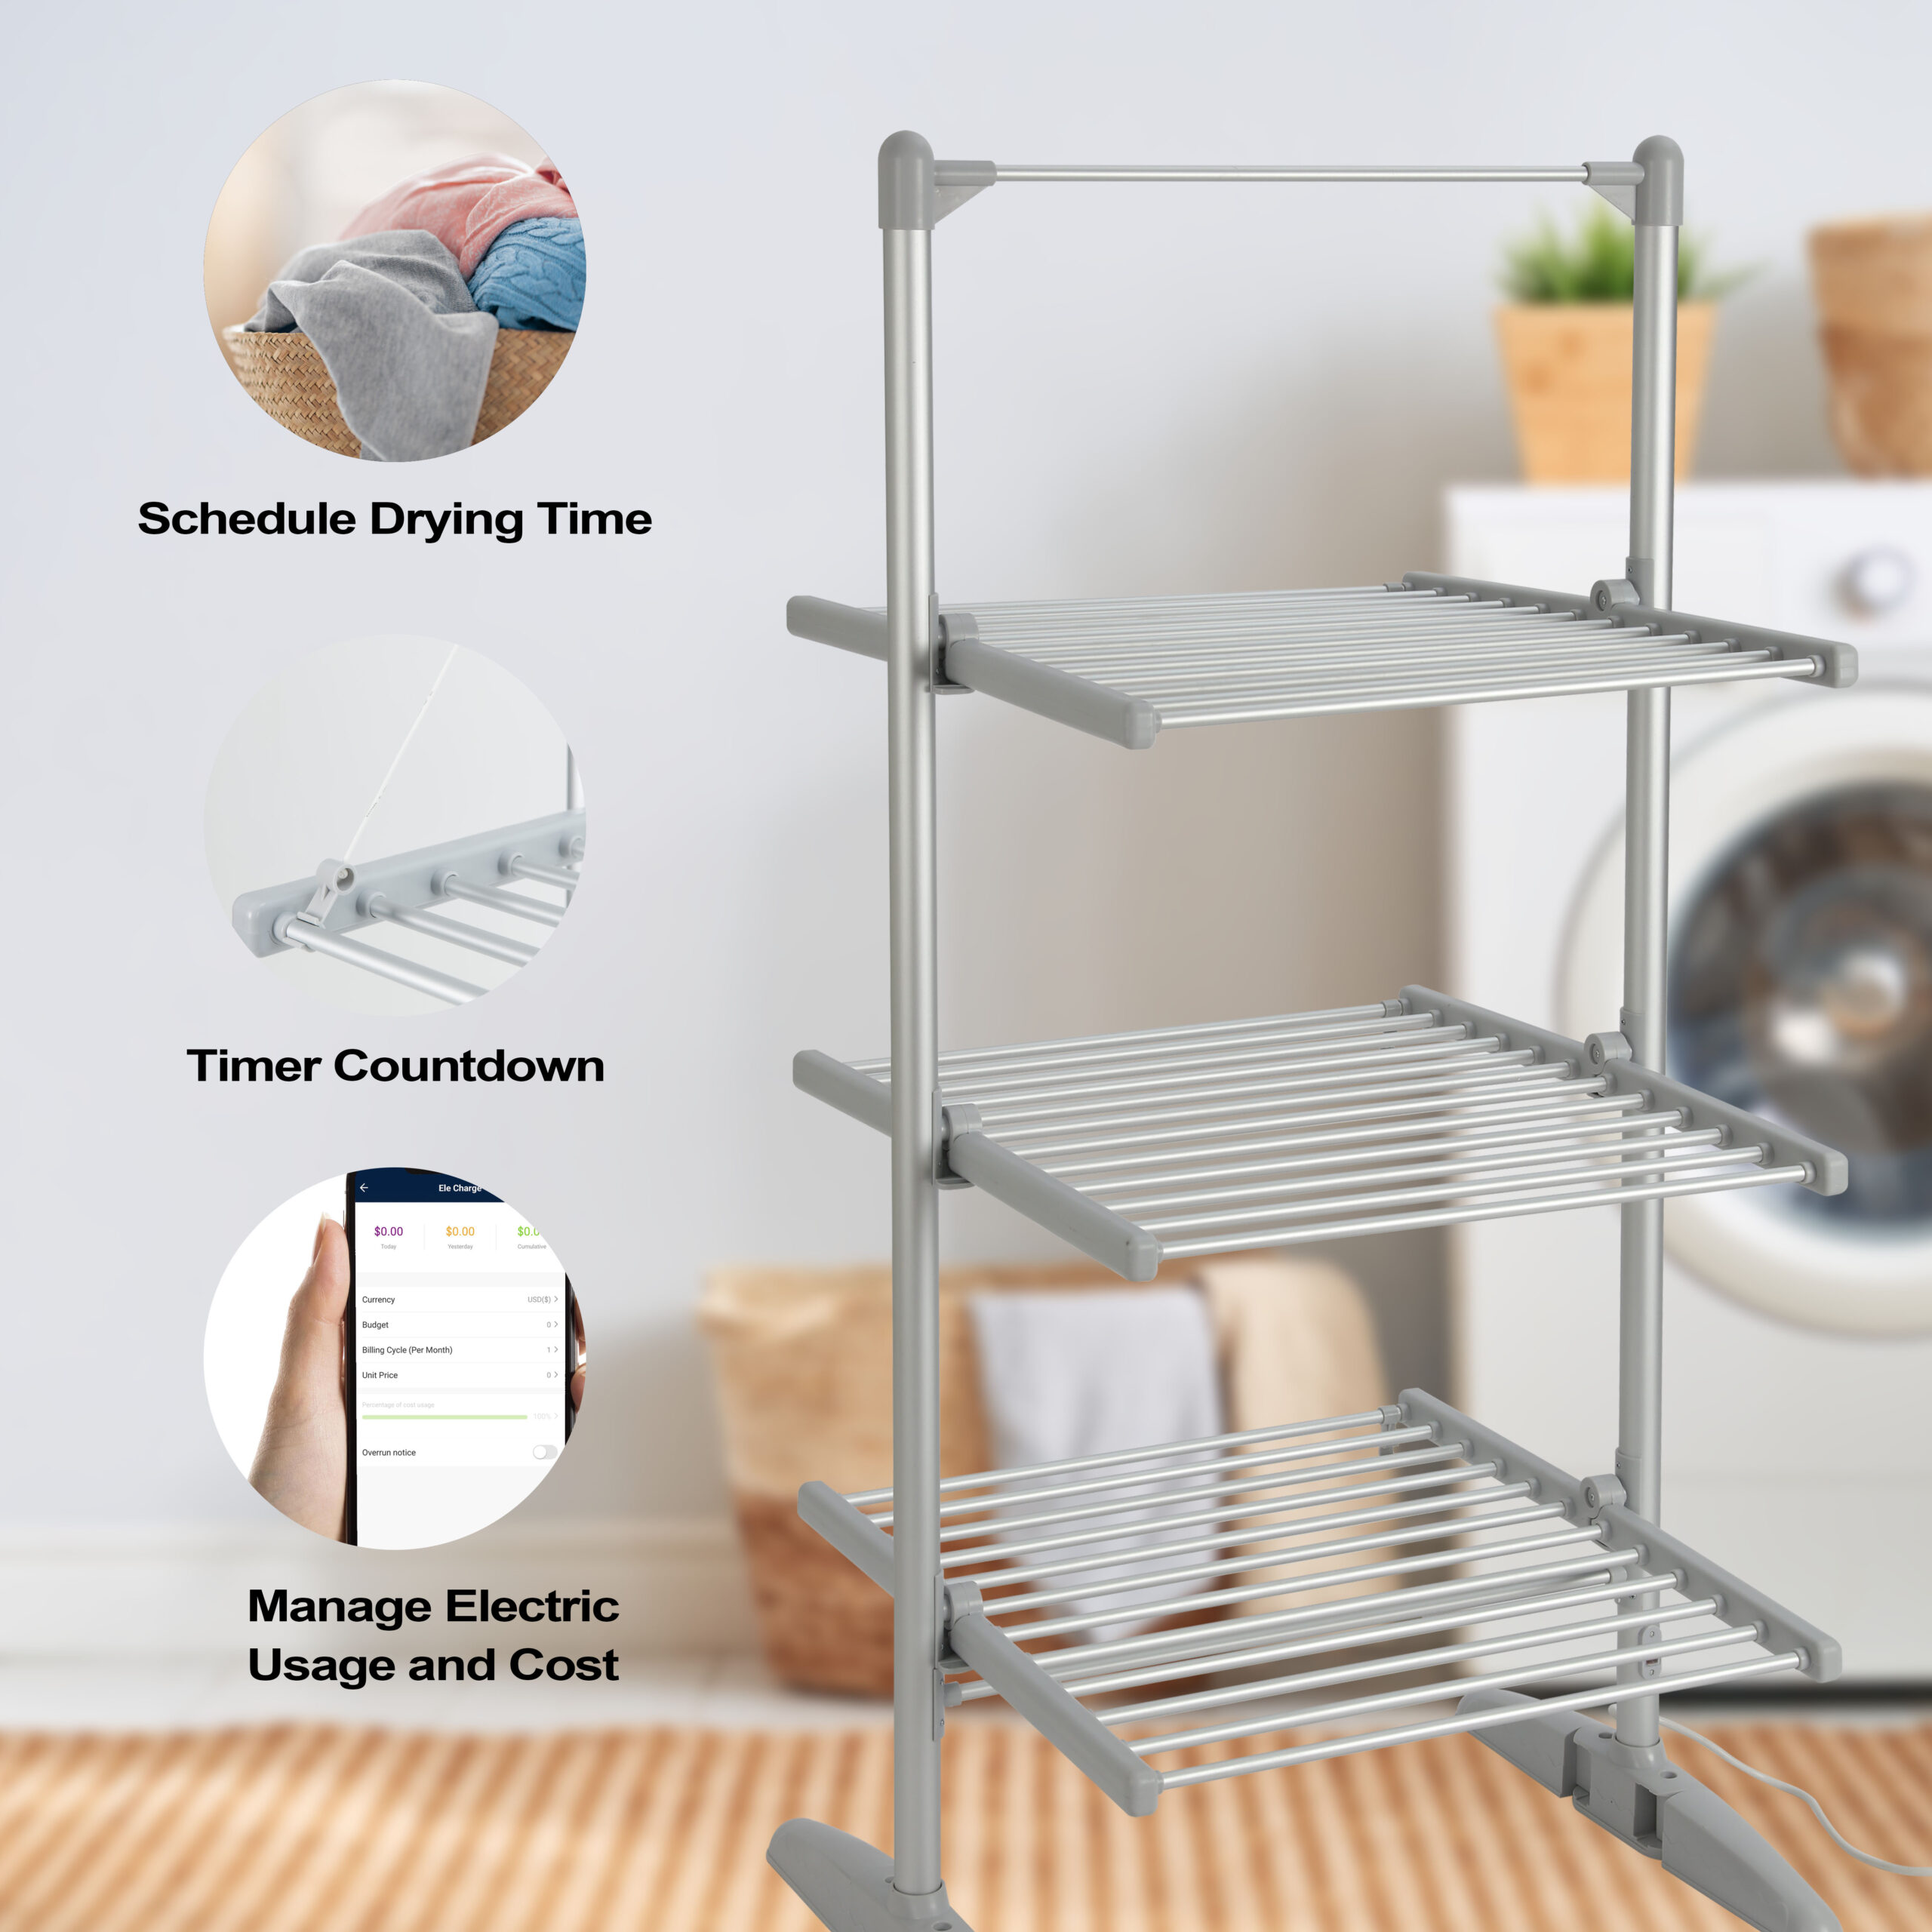 Buy a InnovaGoods Electric Drying Rack 100W Grey - 6 Bars Online